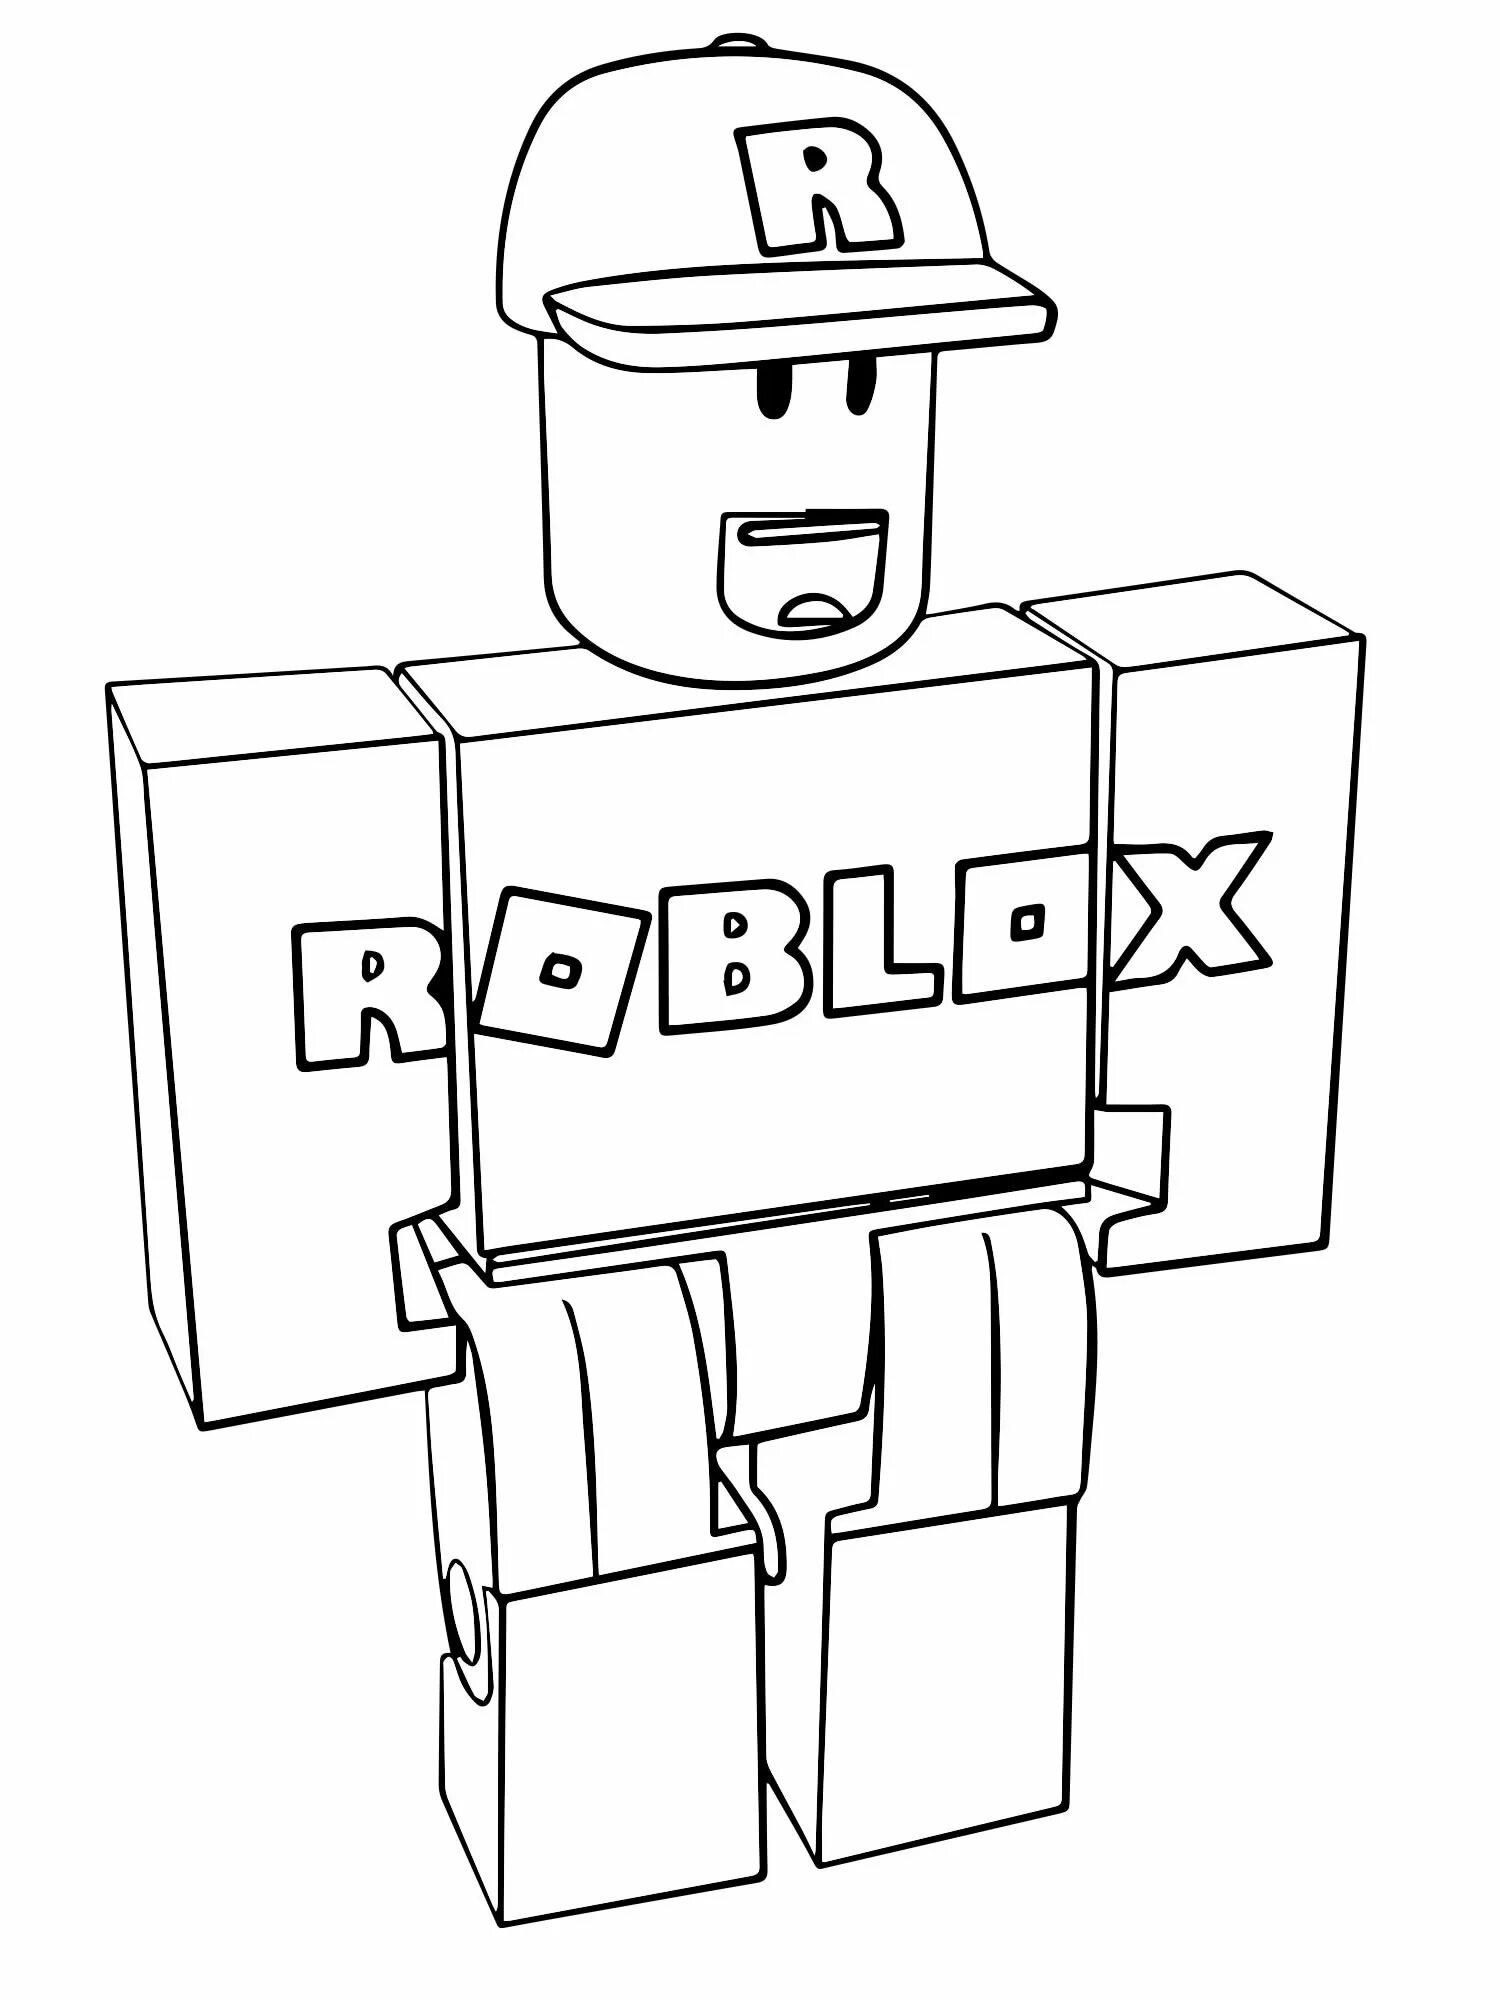 Colorful and delightful coloring roblox lora alphabet